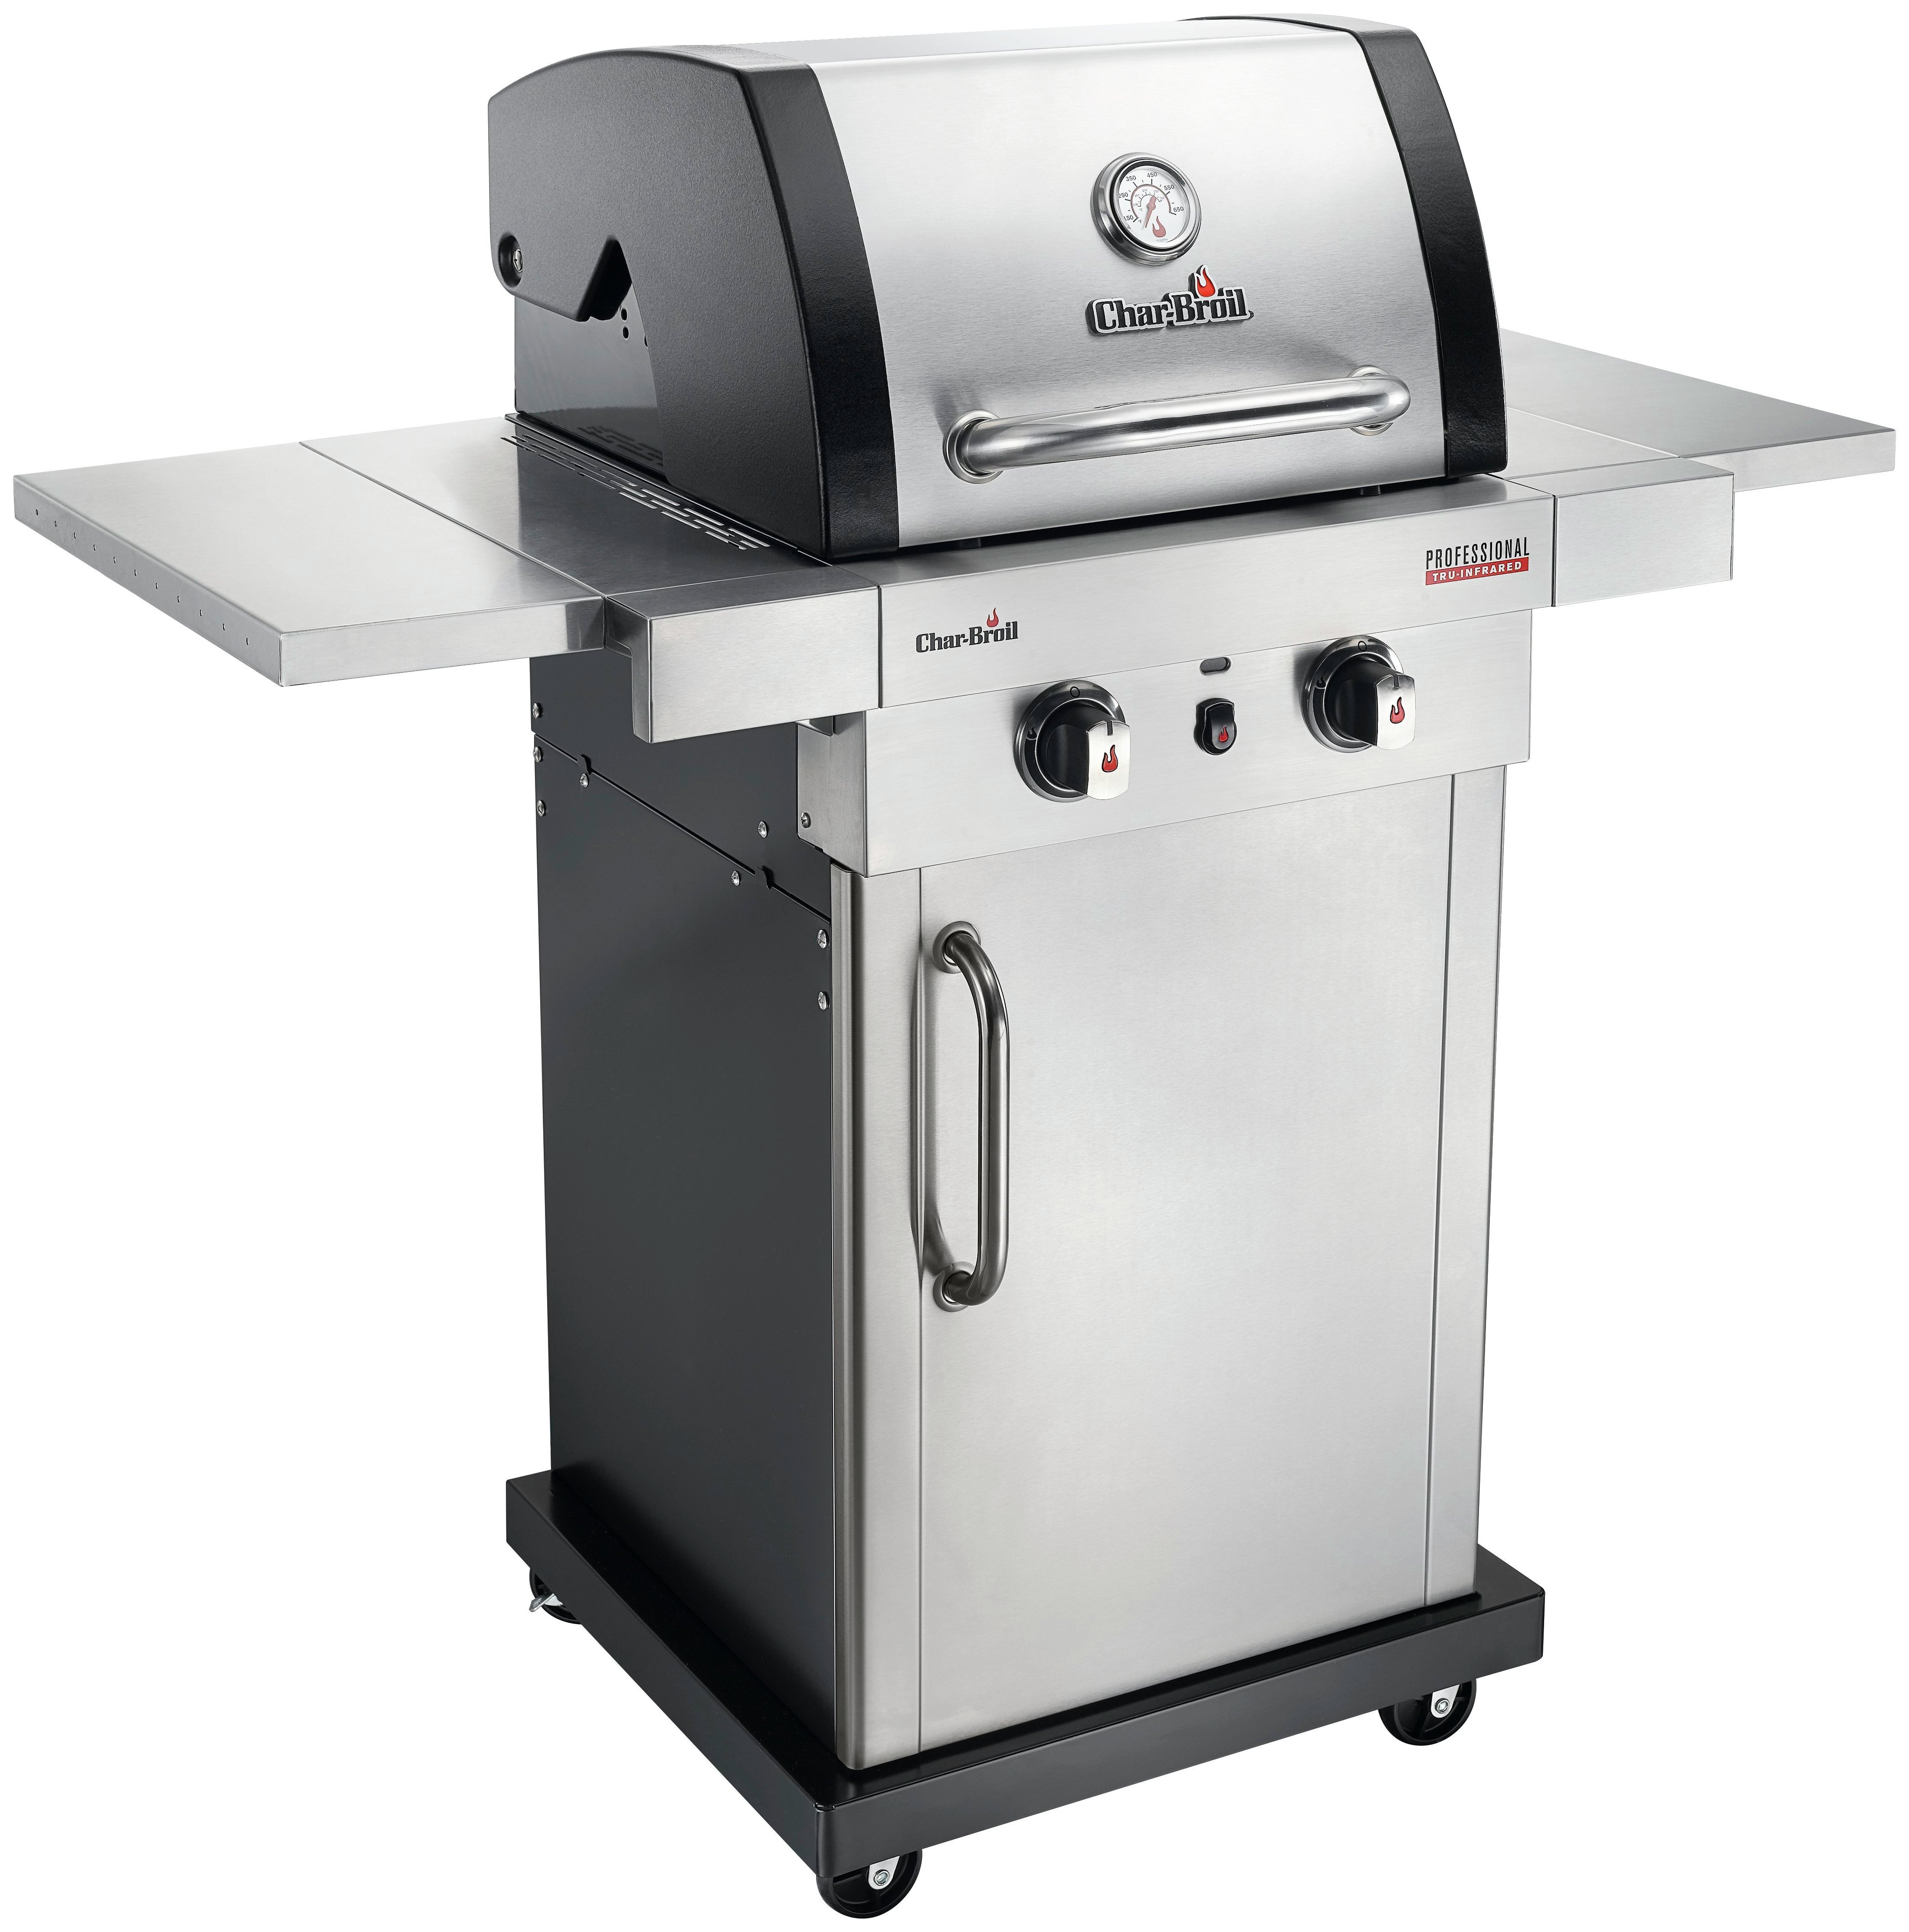 Char-Broil PRO 2200 S review